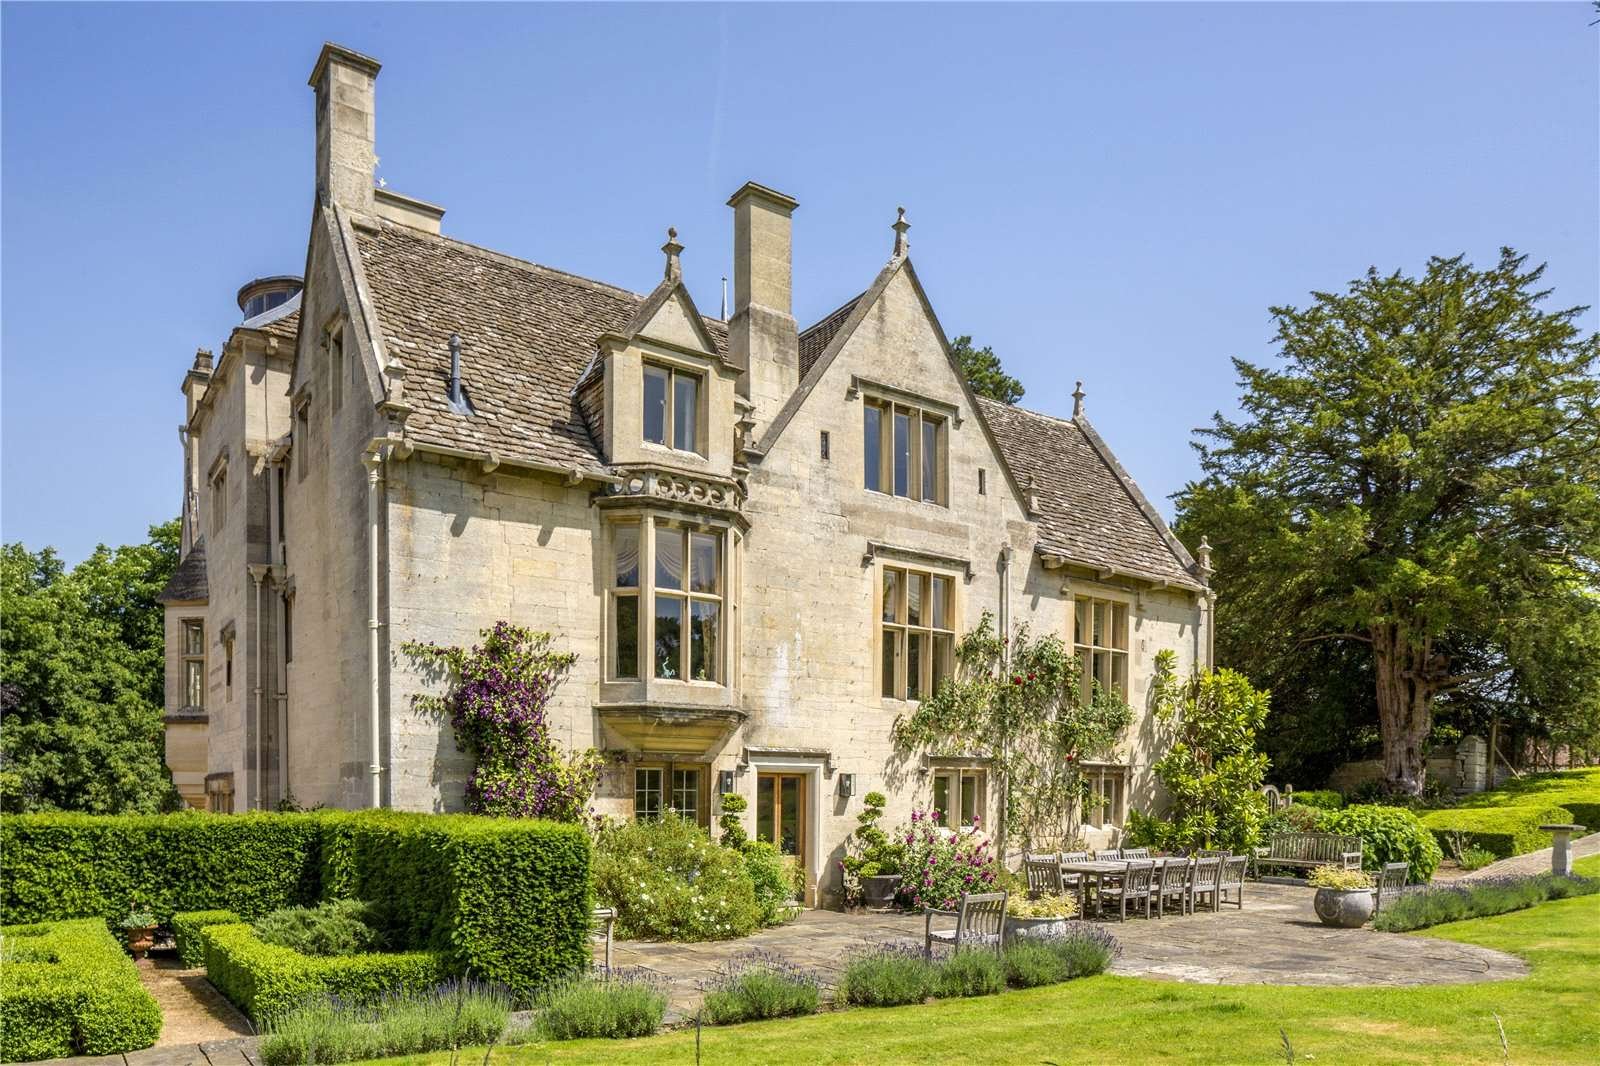 Francis York TCotswolds House Built on the  Site of an Ancient Roman Villa  Savills Bluebook Agency 28.jpg